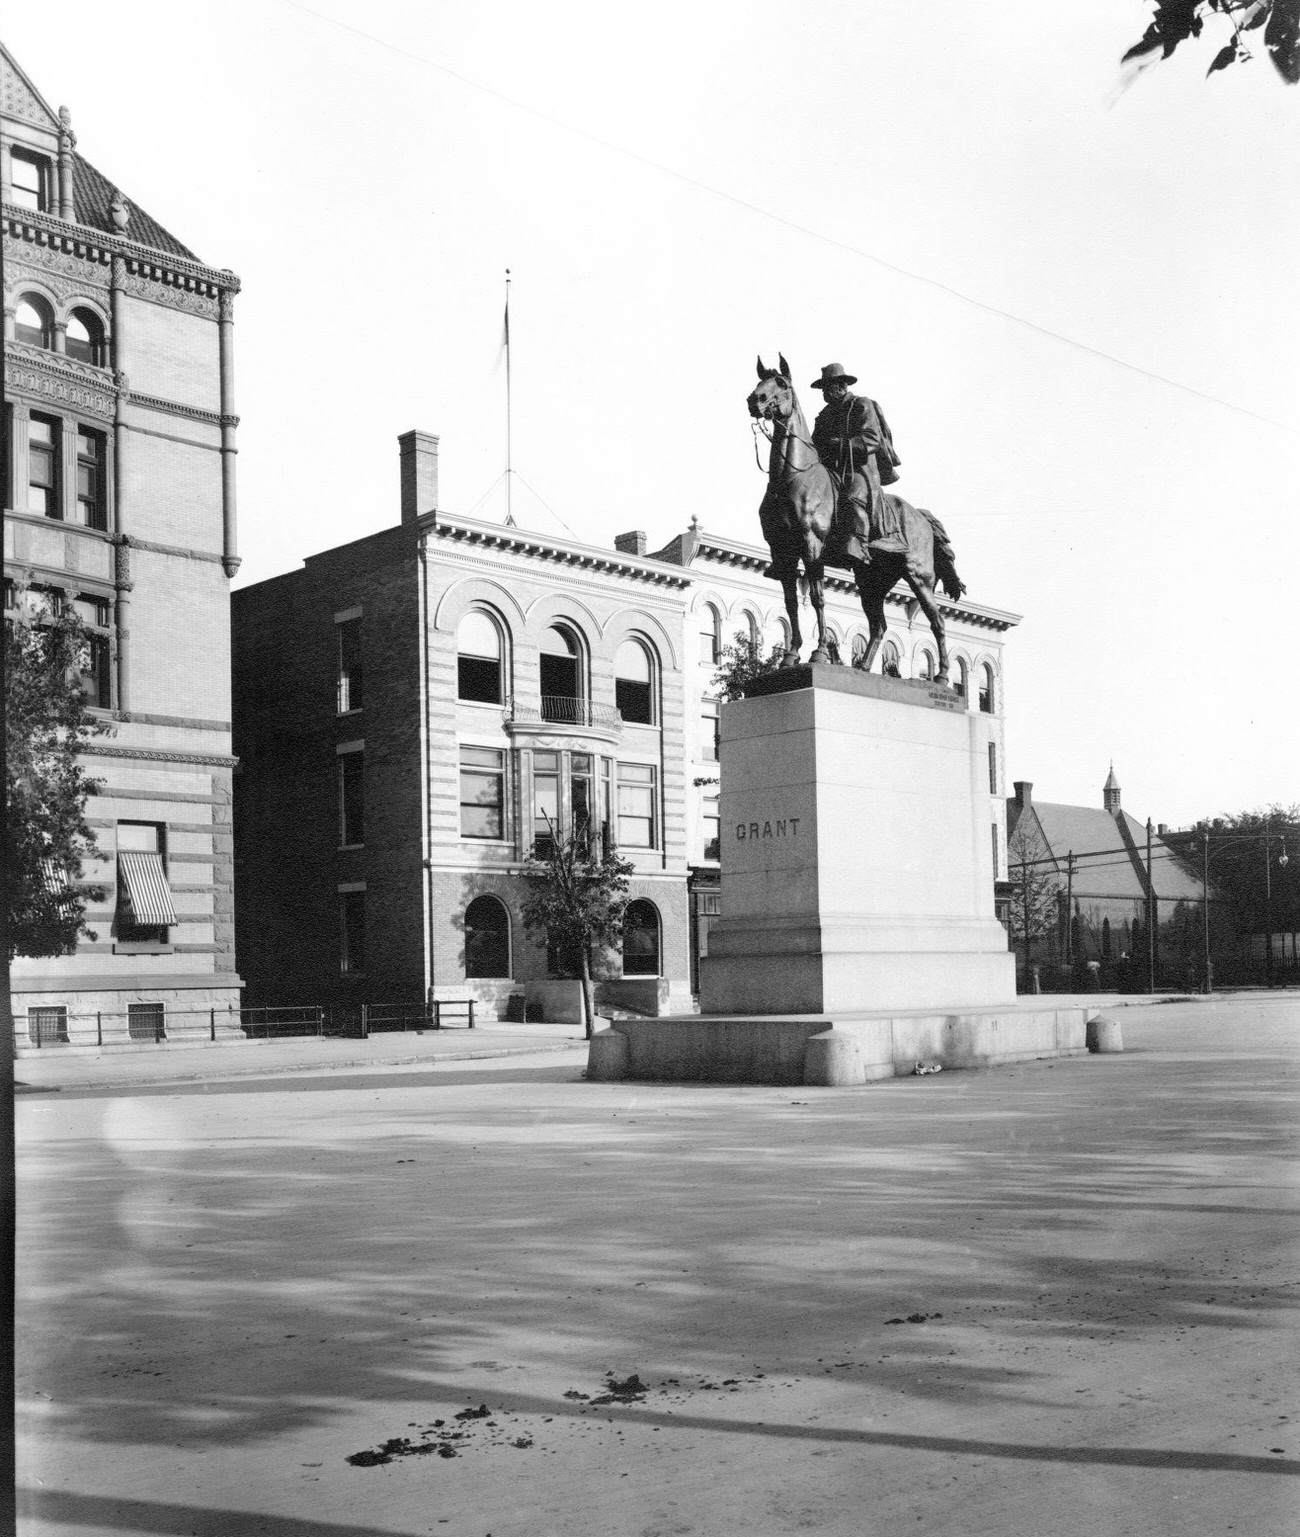 Statue Of Ulysses S Grant At Bedford Avenue And Dean Street, Brooklyn, 1895